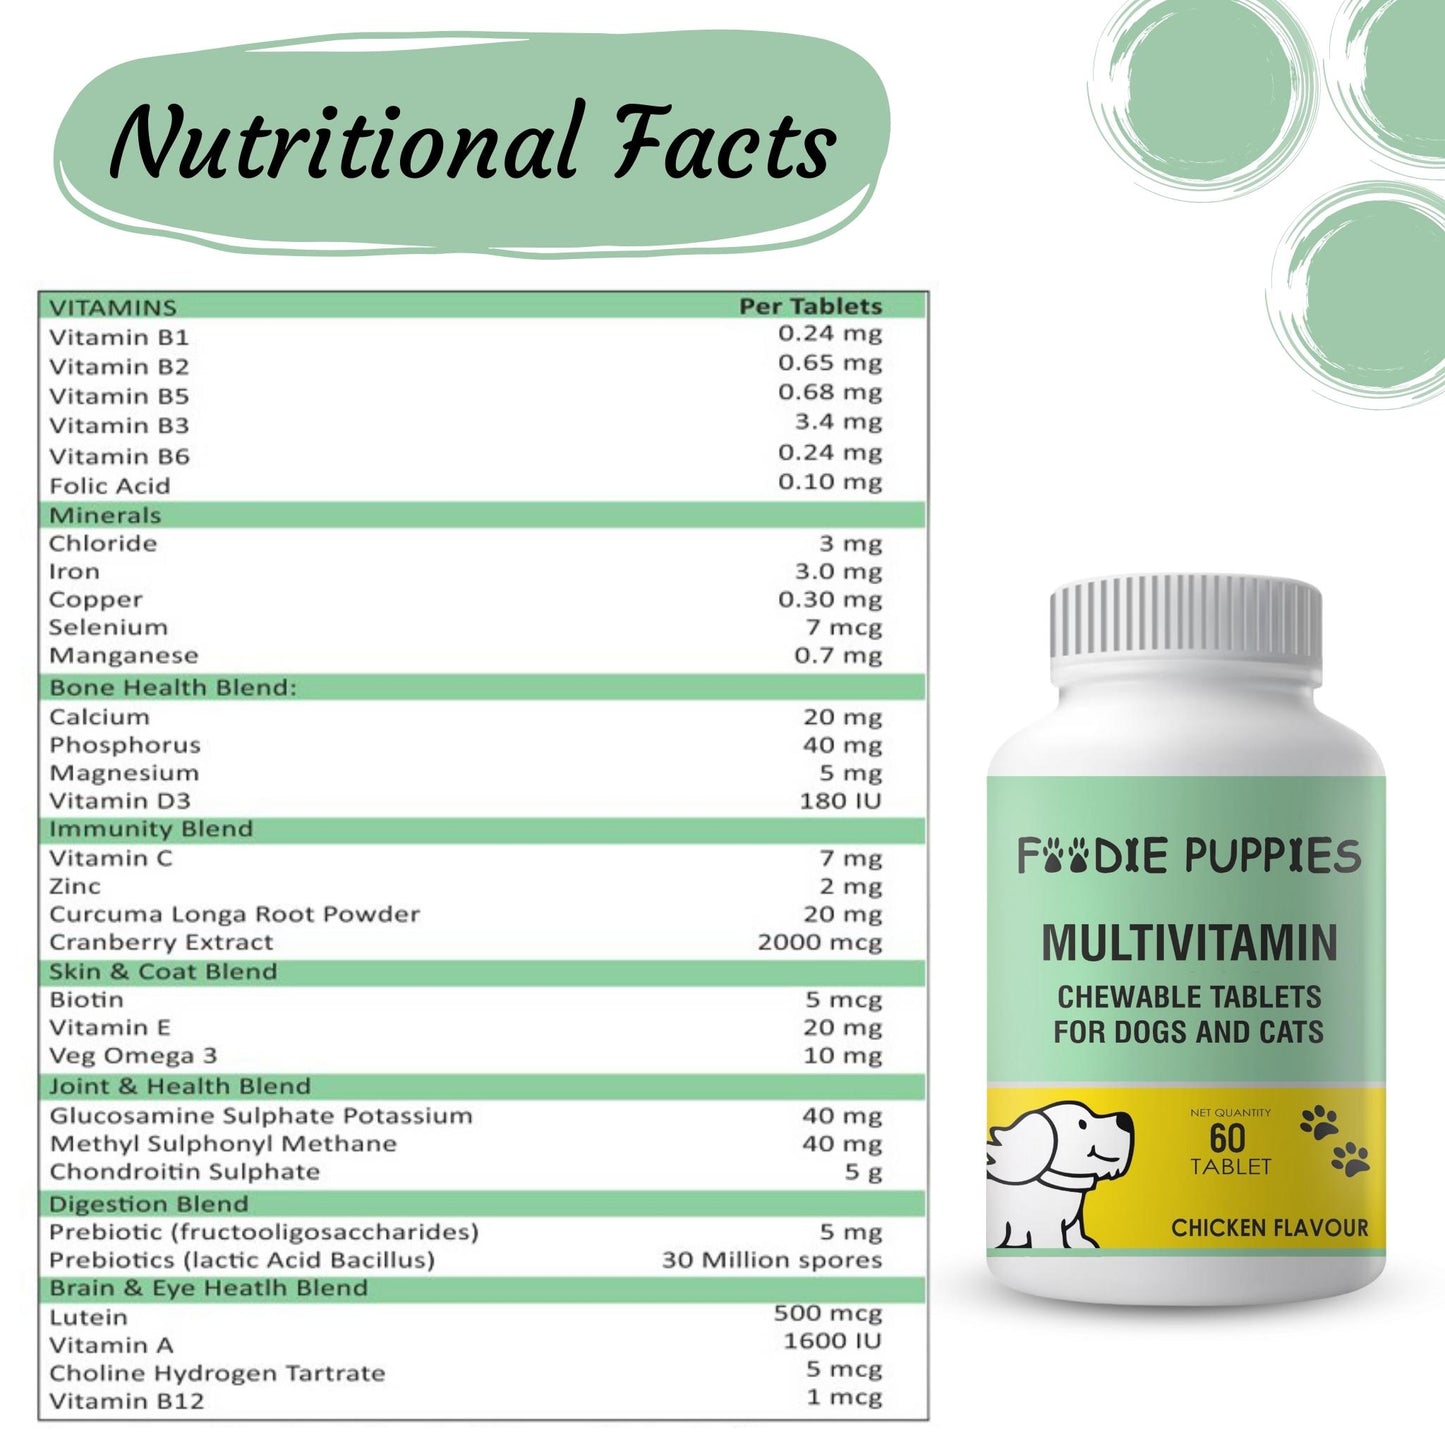 Foodie Puppies Multivitamin 60 Tablets for Dogs & Cats - (Pack of 2)